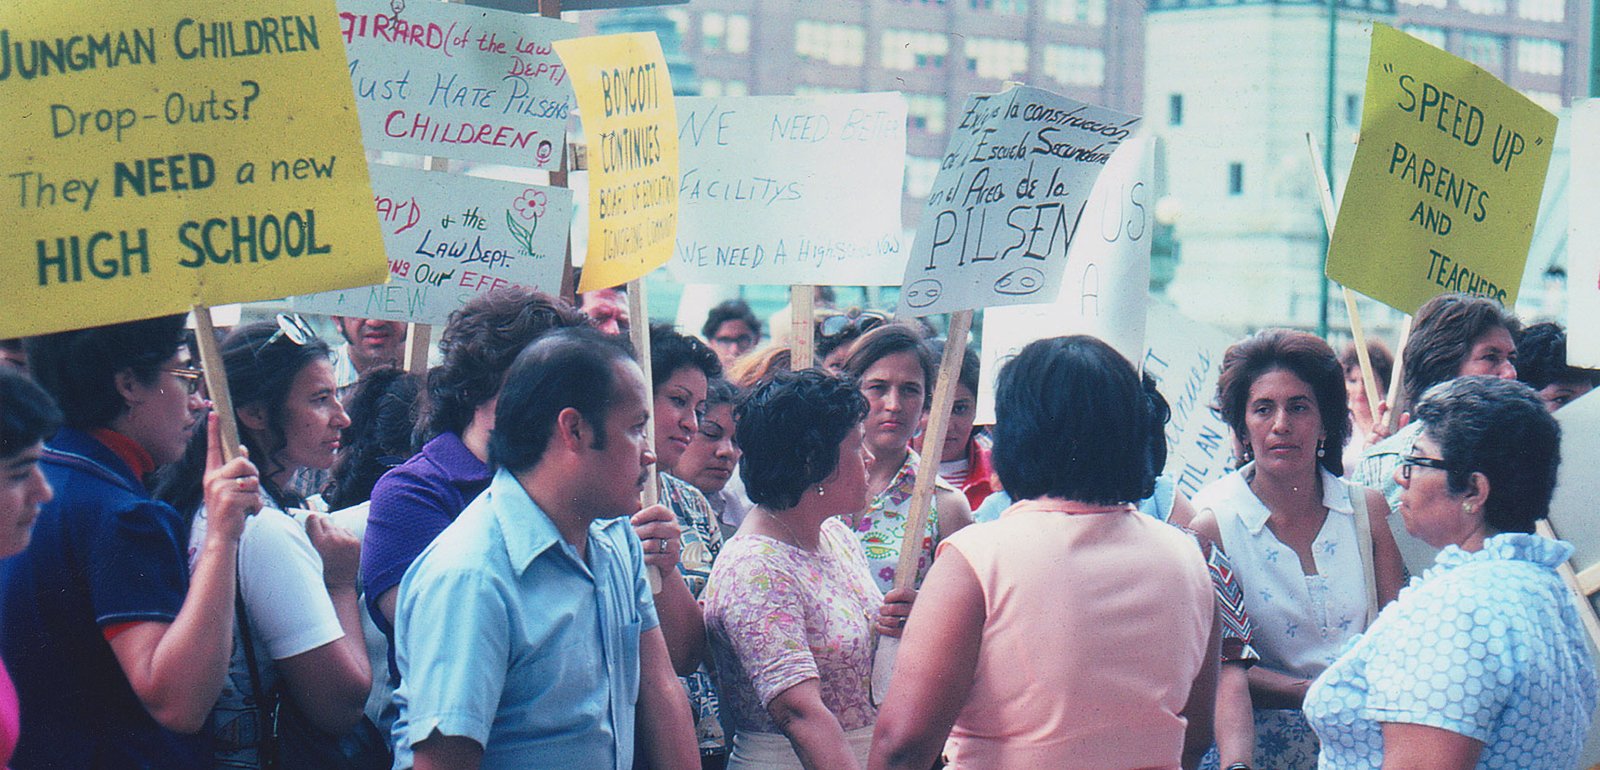 1974 action of 1000 people at Board of Education on LaSalle Street